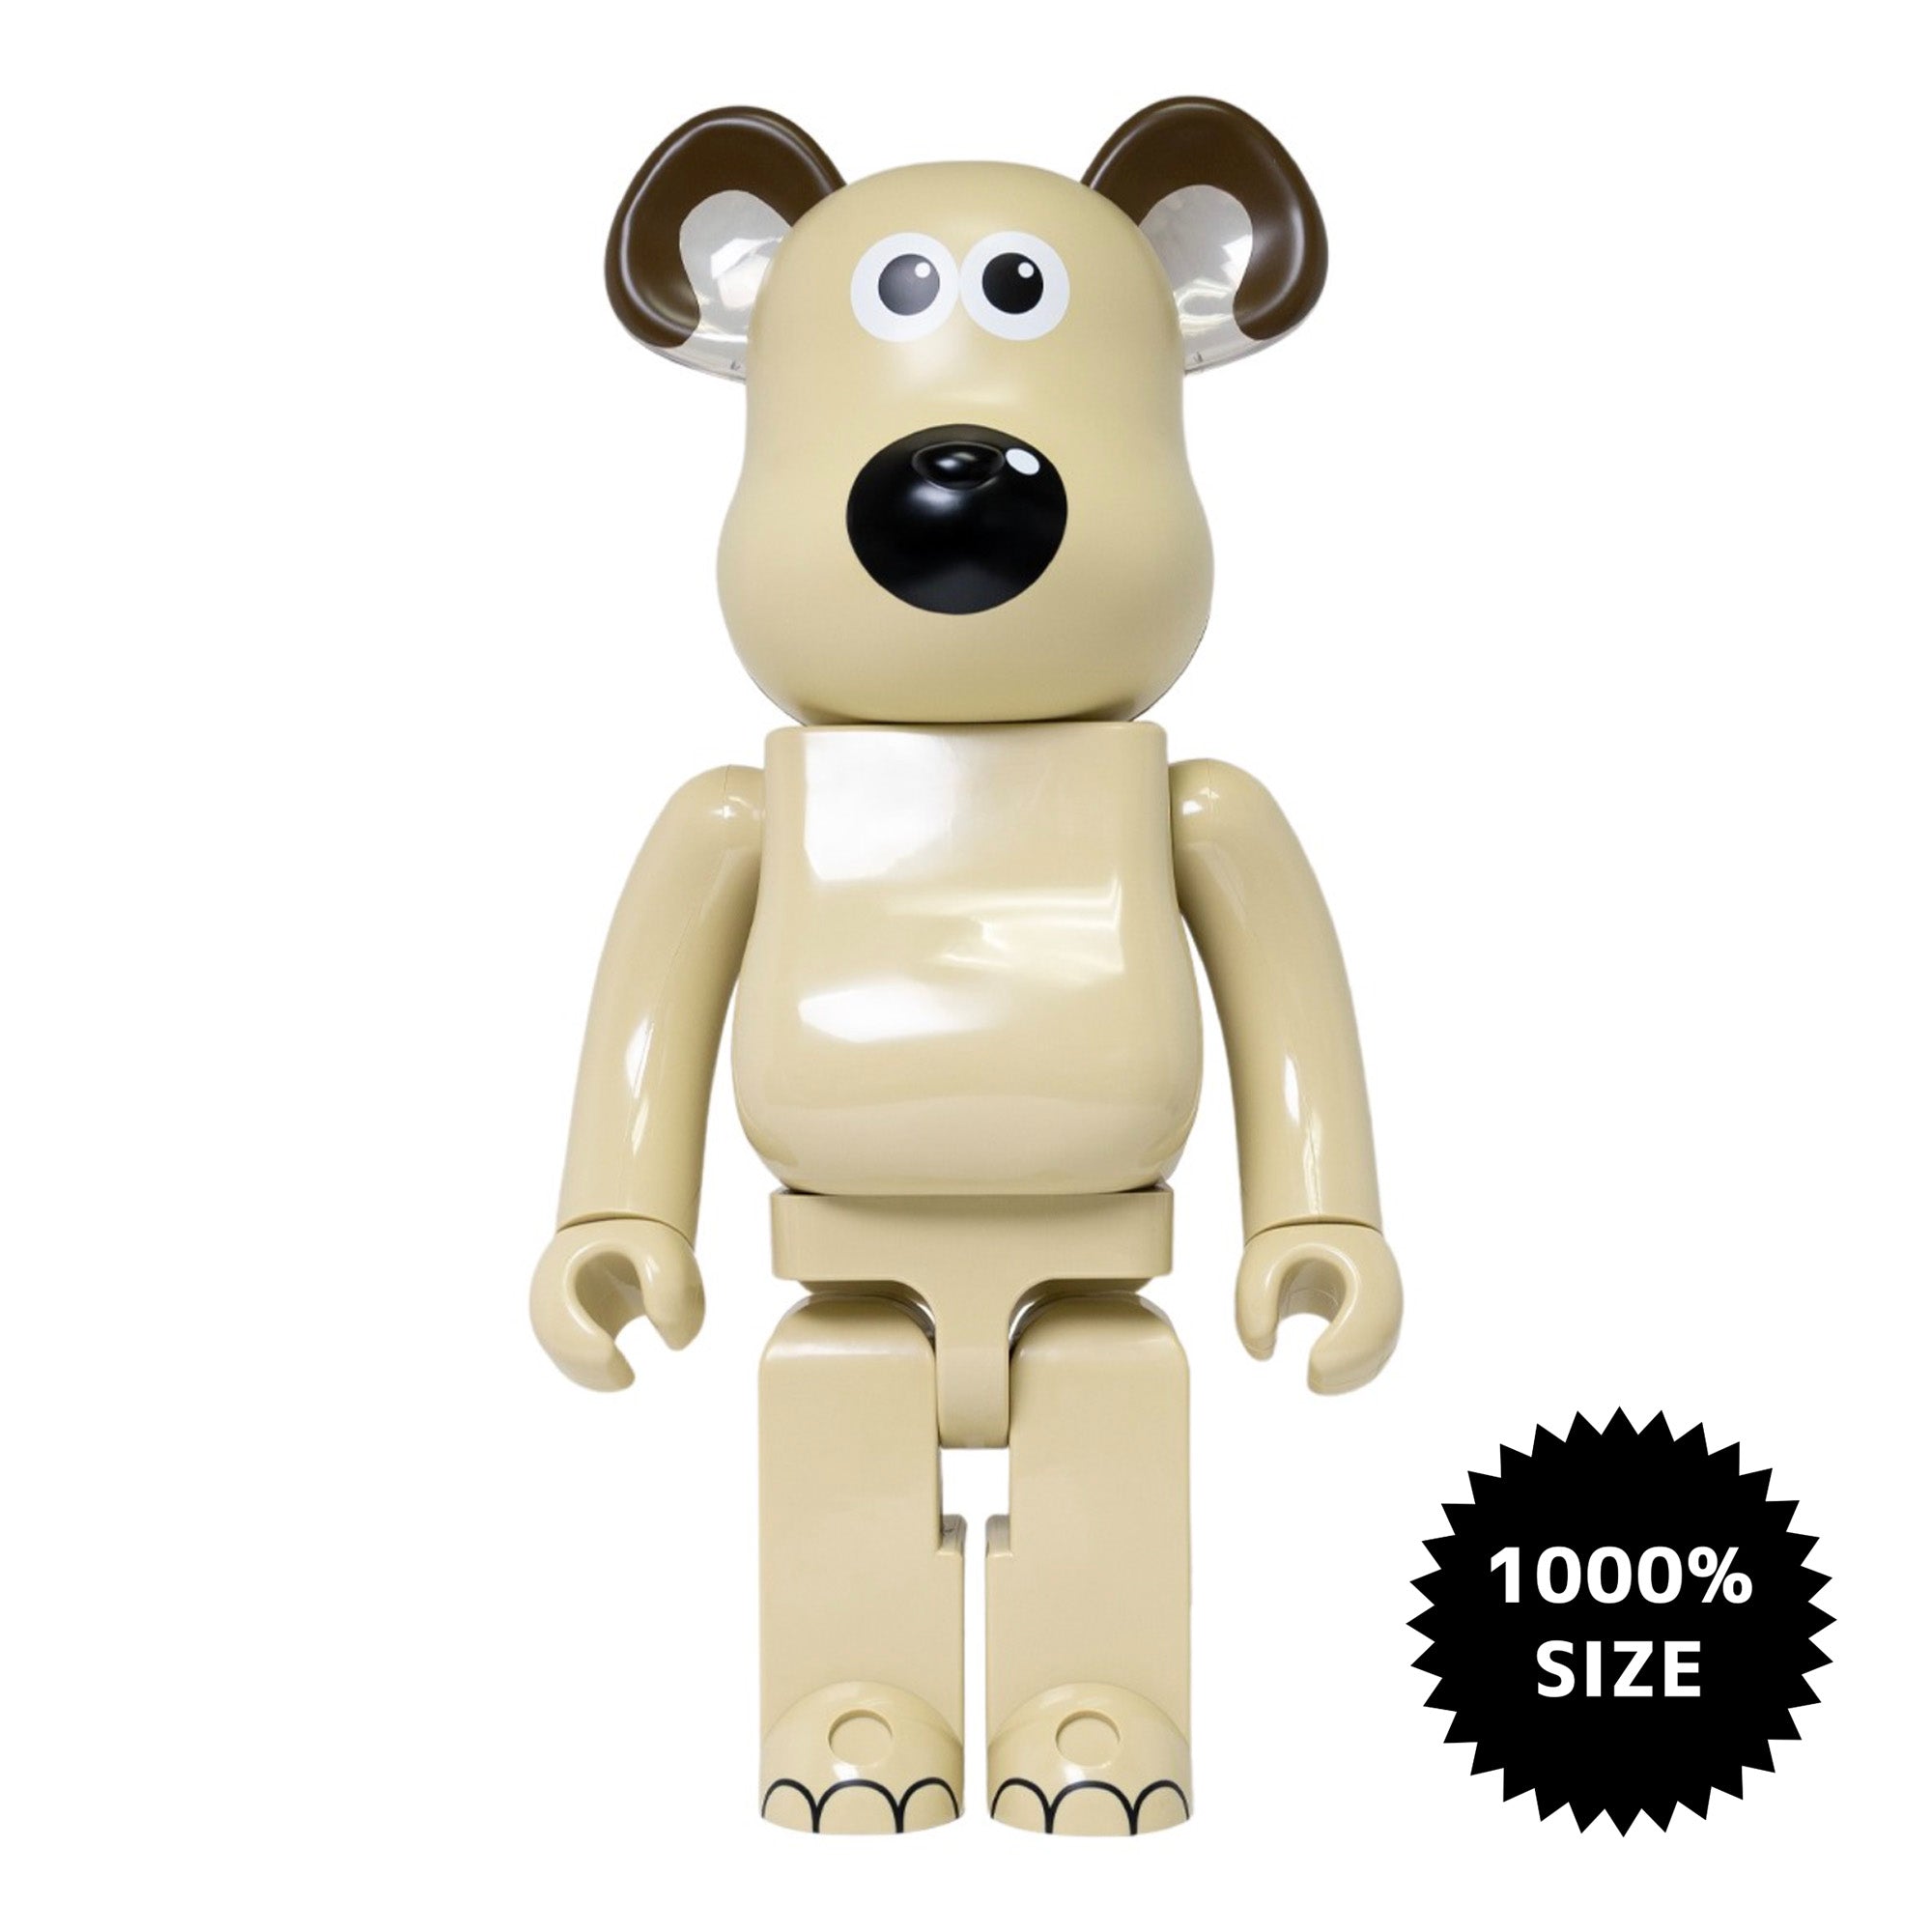 MEDICOM TOY: BE@RBRICK - Wallace and Gromit - Gromit 1000%